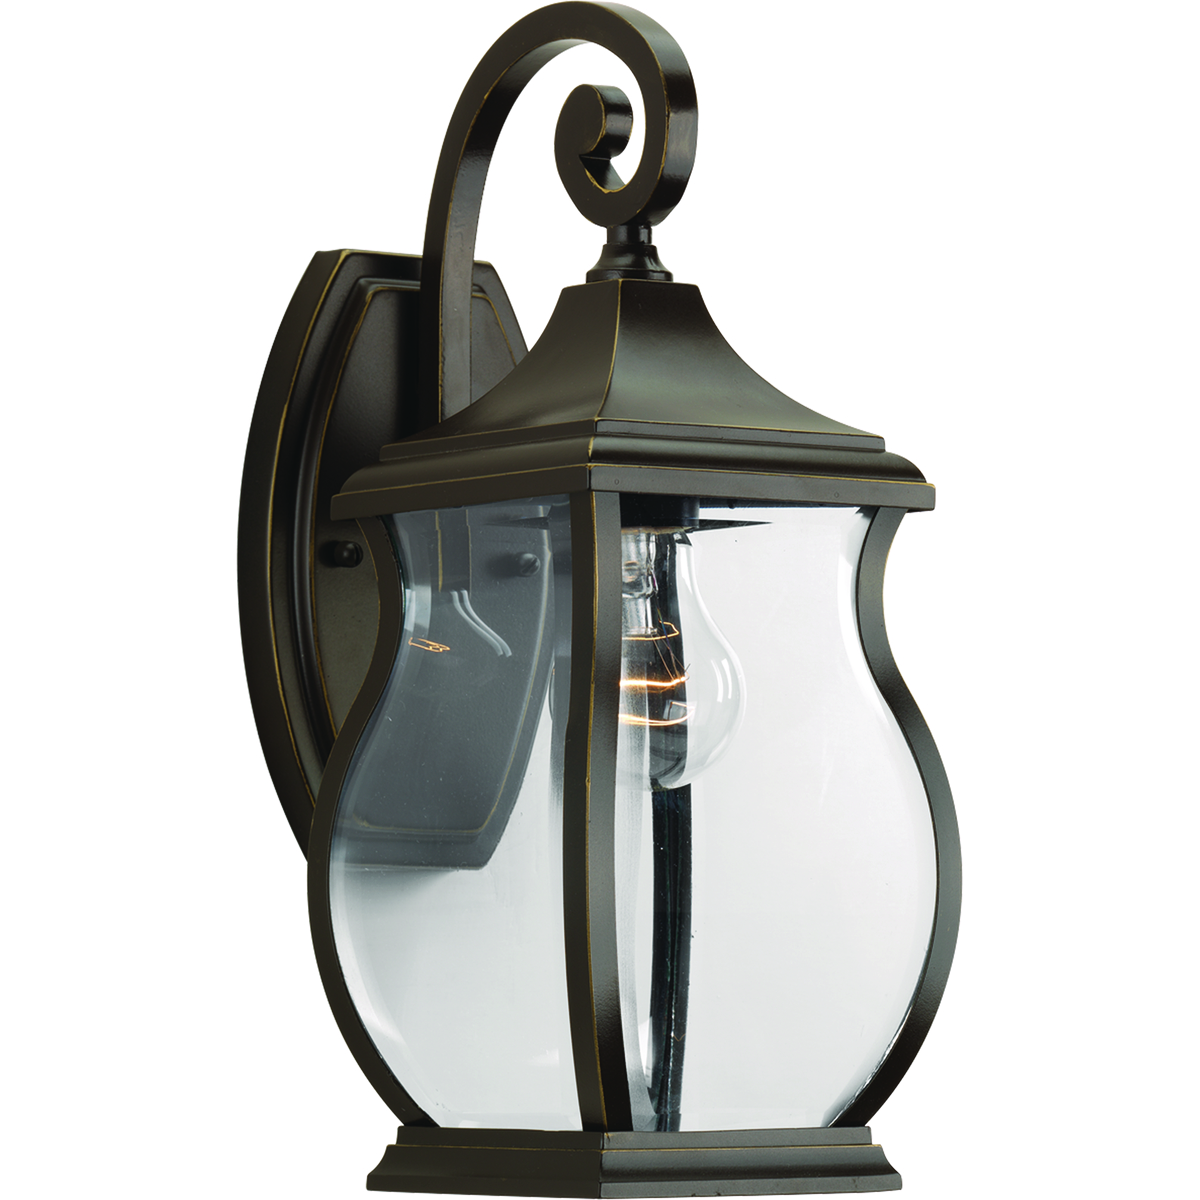 Enjoy the simple elegance of traditional styling in this one-light wall lantern. Township's clear beveled glass and Oil Rubbed Bronze finish contains notes of New England-inspired style for this new outdoor lantern collection.